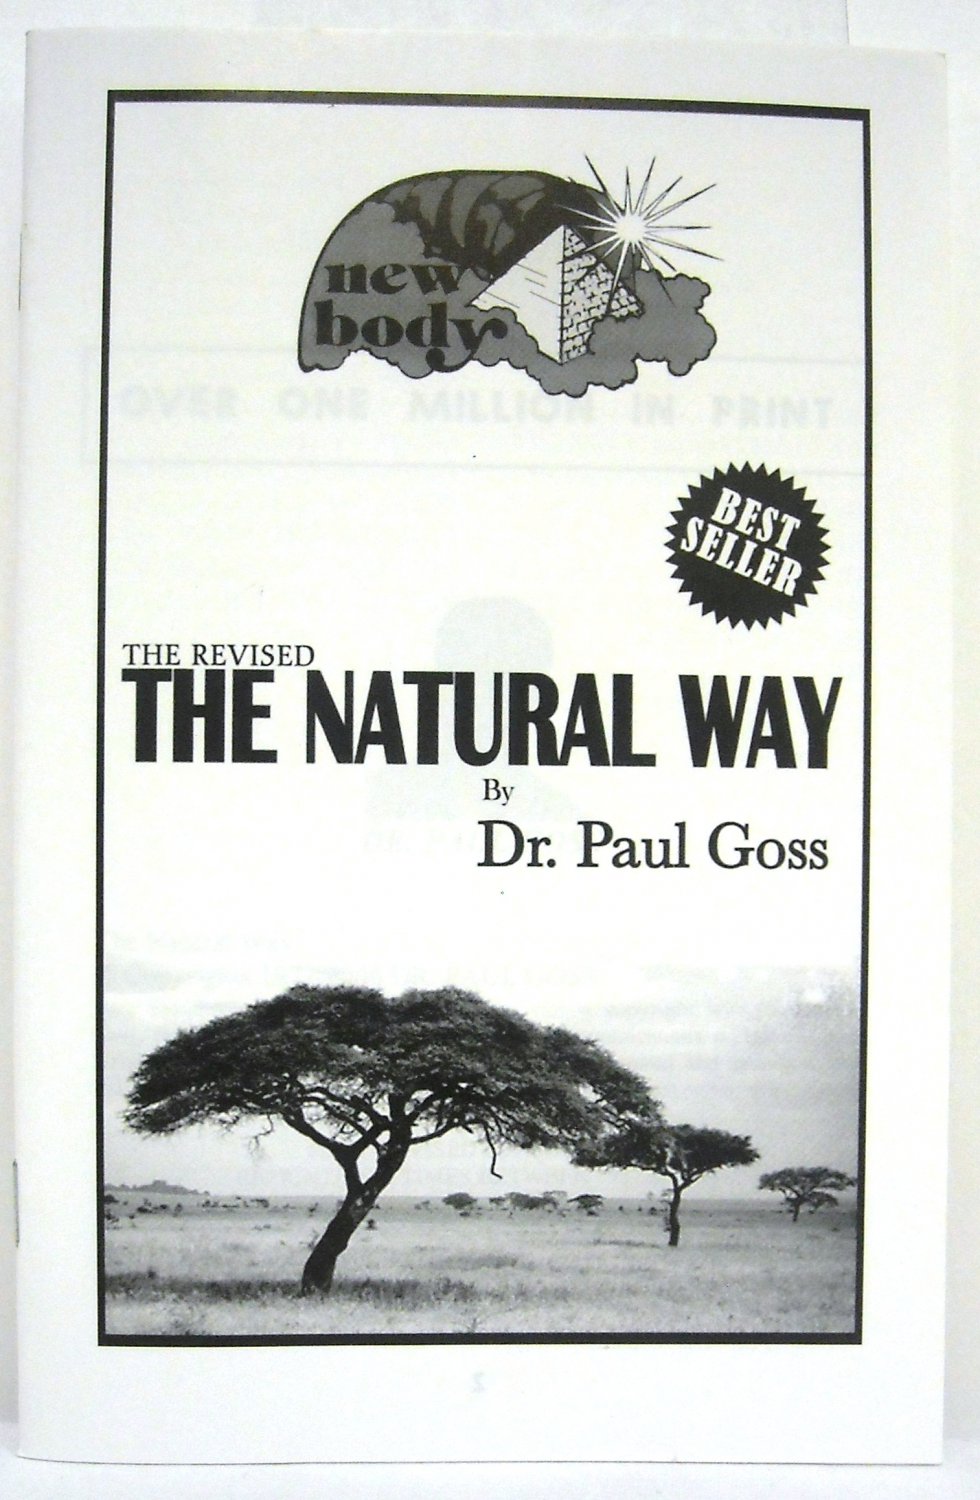 The Natural Way booklet (black and white)